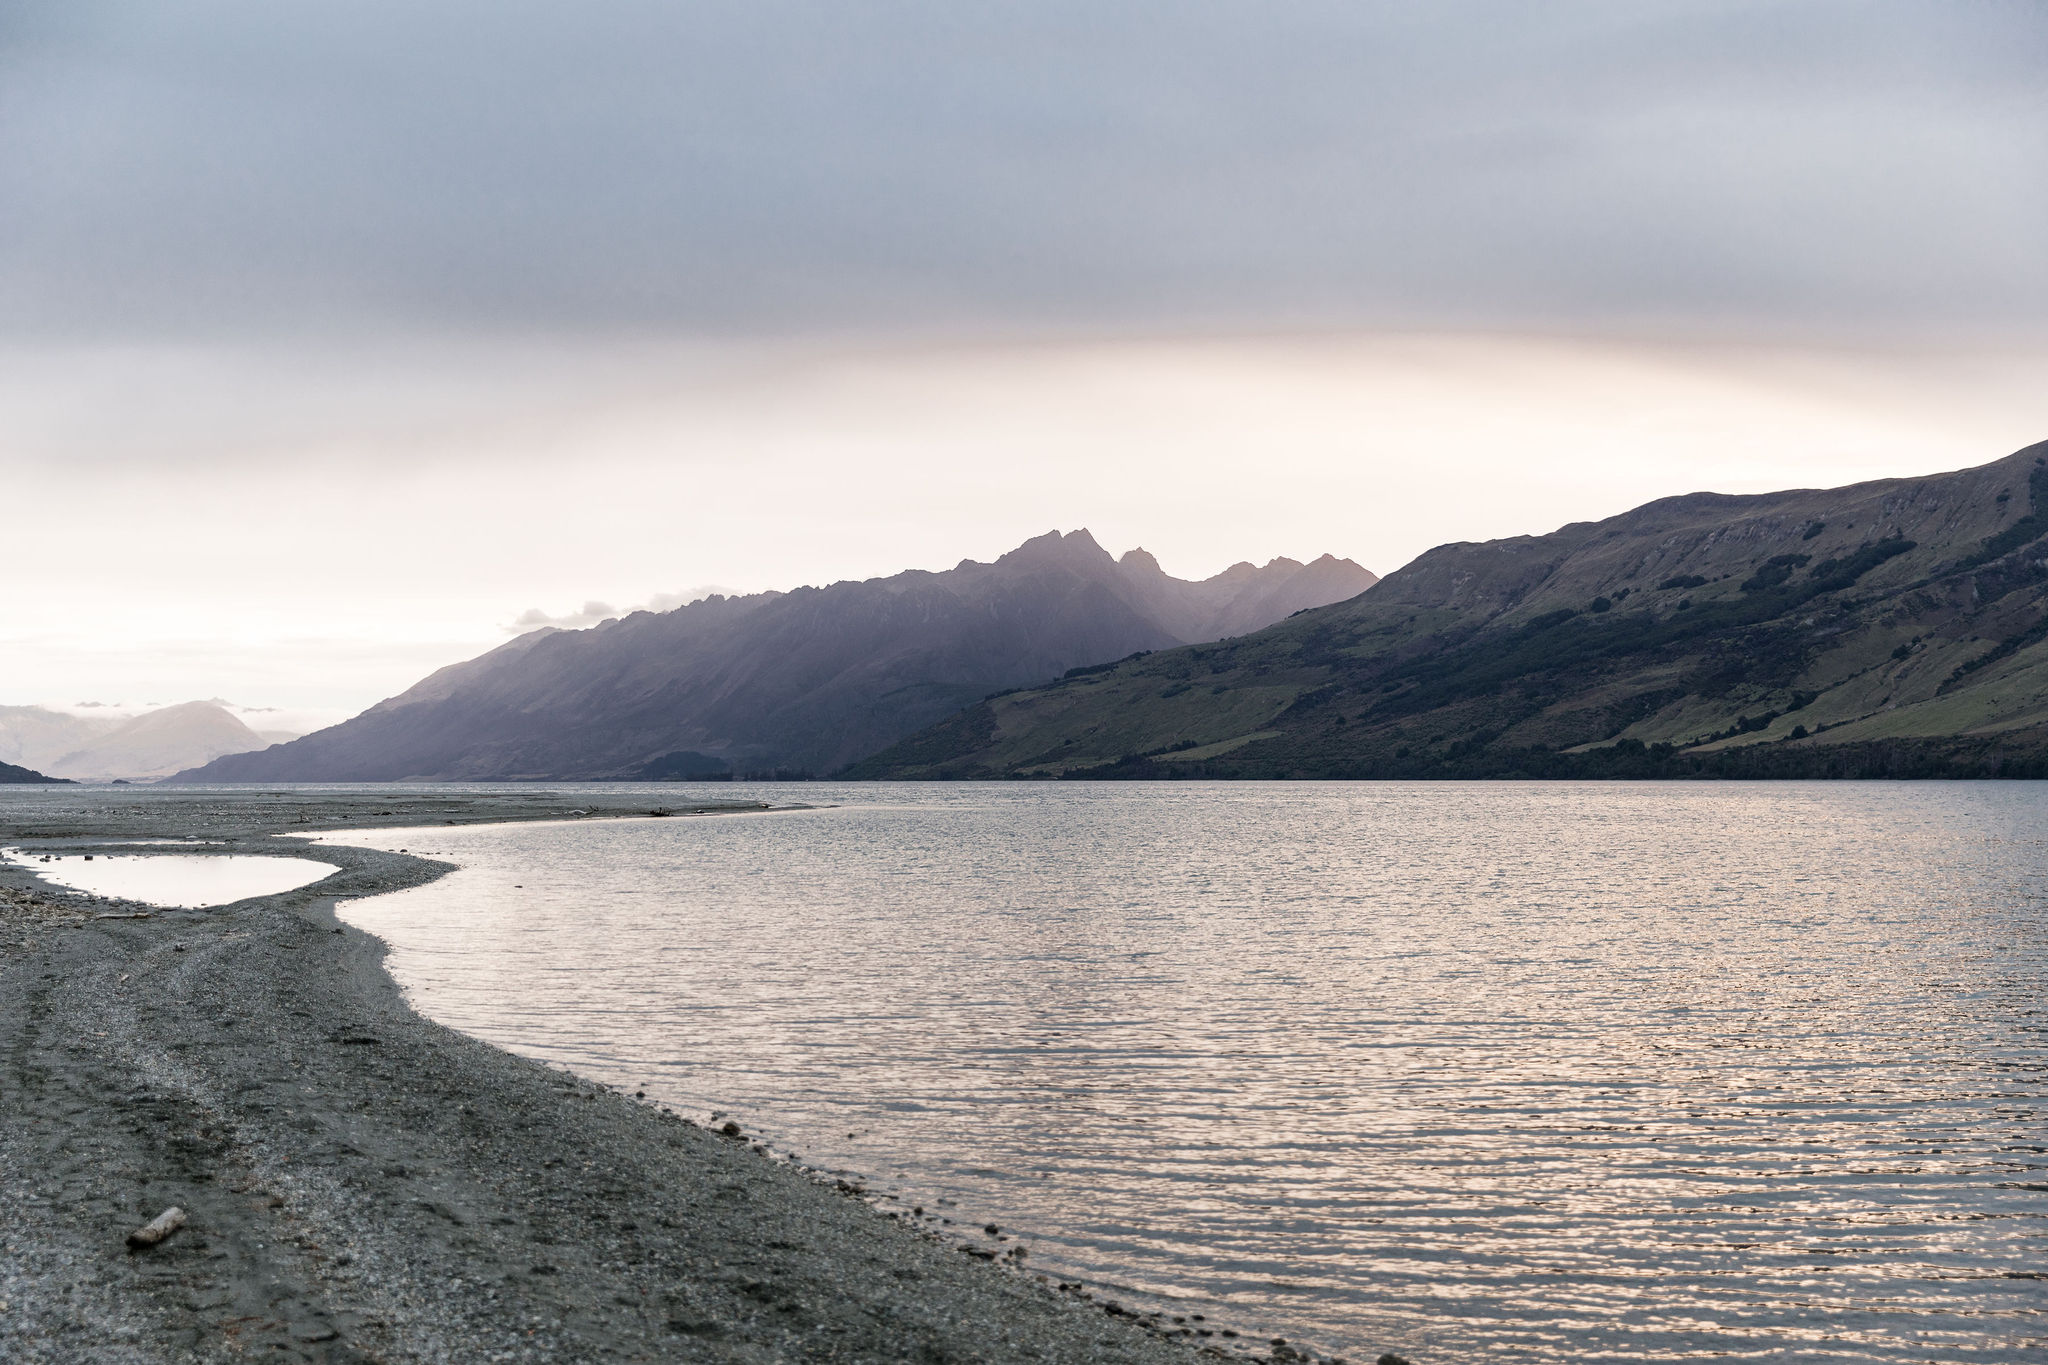 Glenorchy Lake Shore sunset at the end of 2020